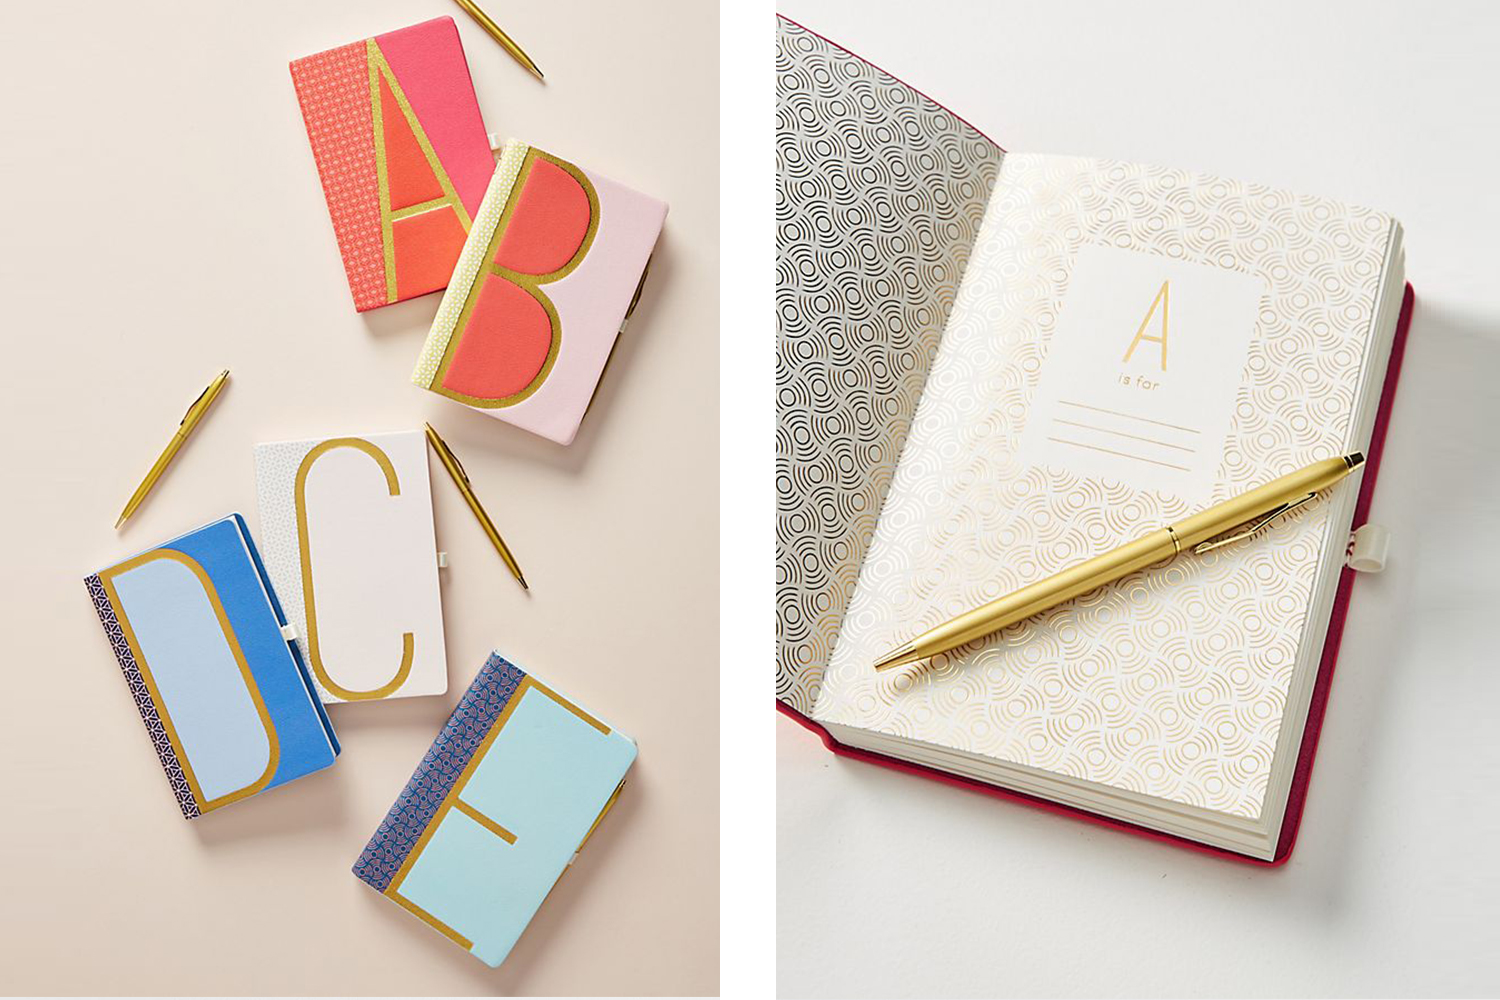  The fun personalized Monogram Journal by  Anthropologie . 